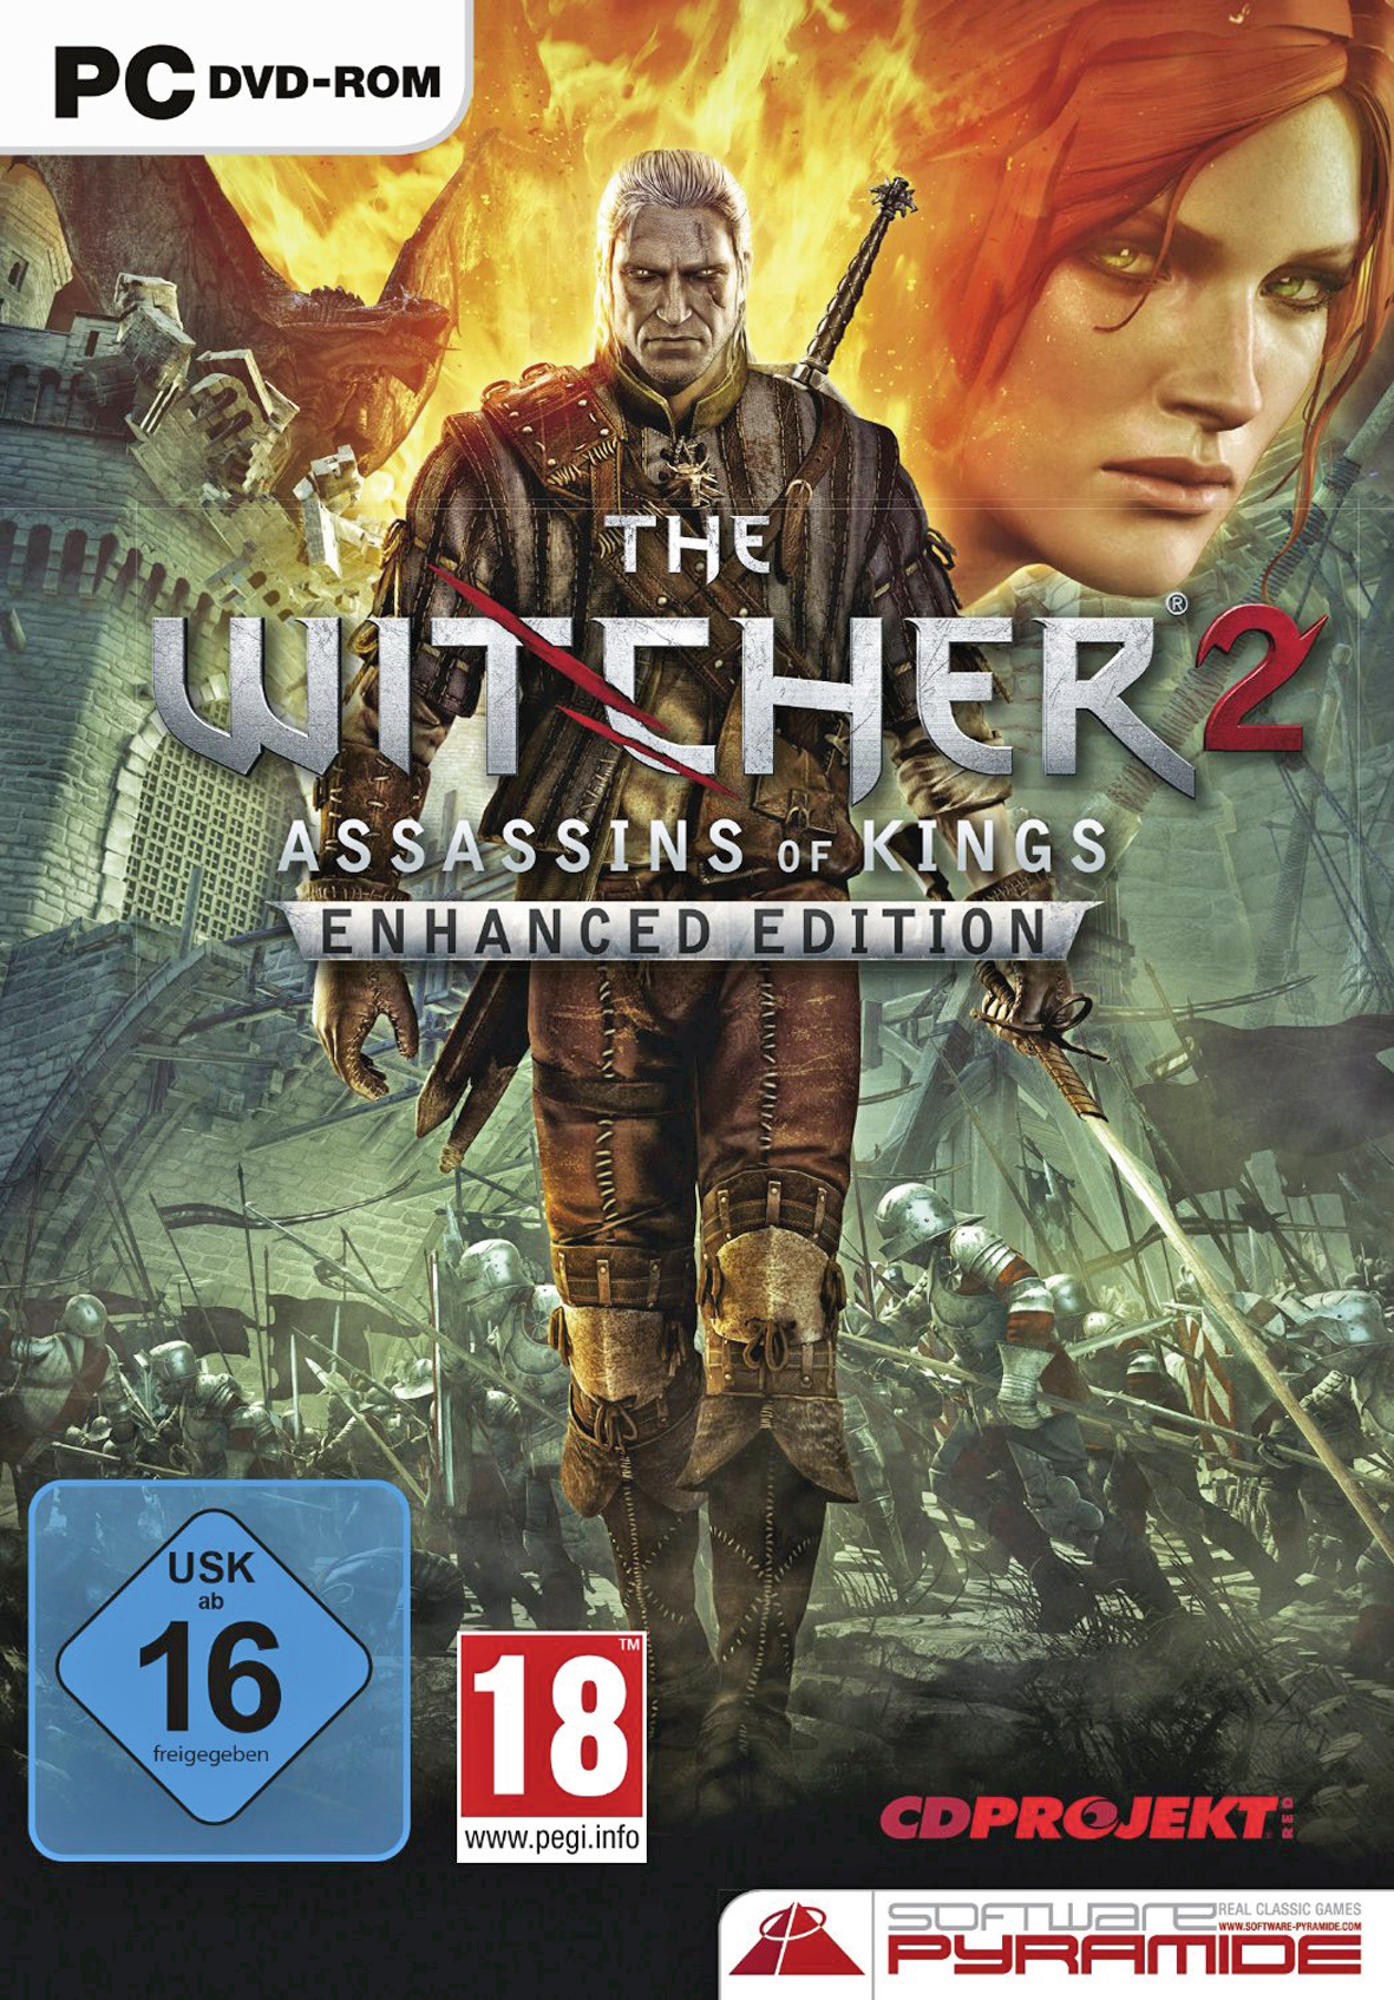 2 [PC] of Kings Assassins - Witcher - The